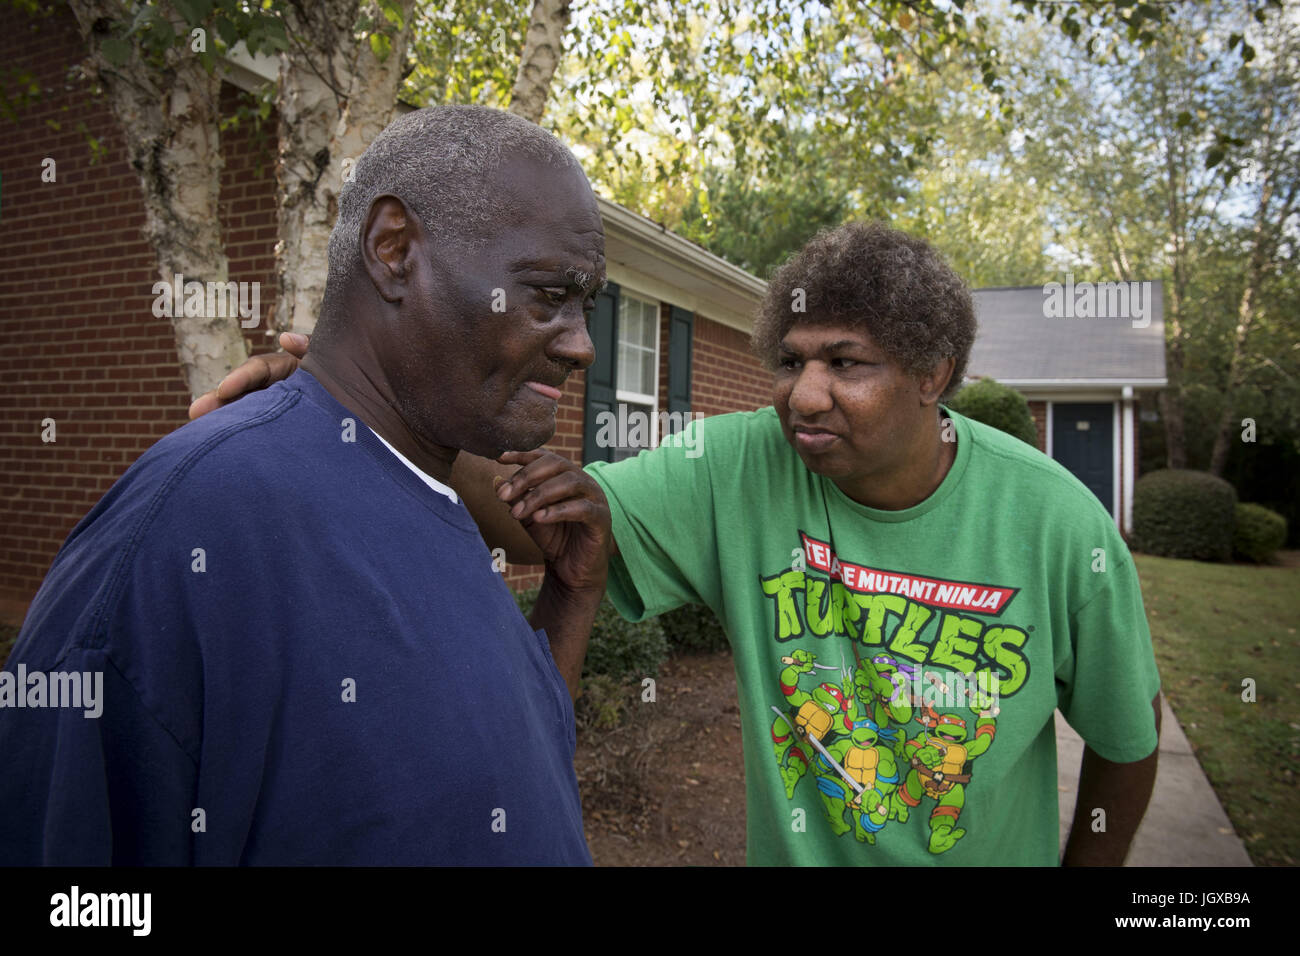 Athens, GA, USA. 13th Oct, 2014. Howard Jackson and Perry Hendricks at their duplex apartment.They are supported by staff from the Georgia Options non-profit organization that helps individuals with developmental disabilities live independently, with funding from their Medicaid waivers. Both men lived in state institutions for decades before transitioning to their own home. Credit: Robin Rayne Nelson/ZUMA Wire/Alamy Live News Stock Photo